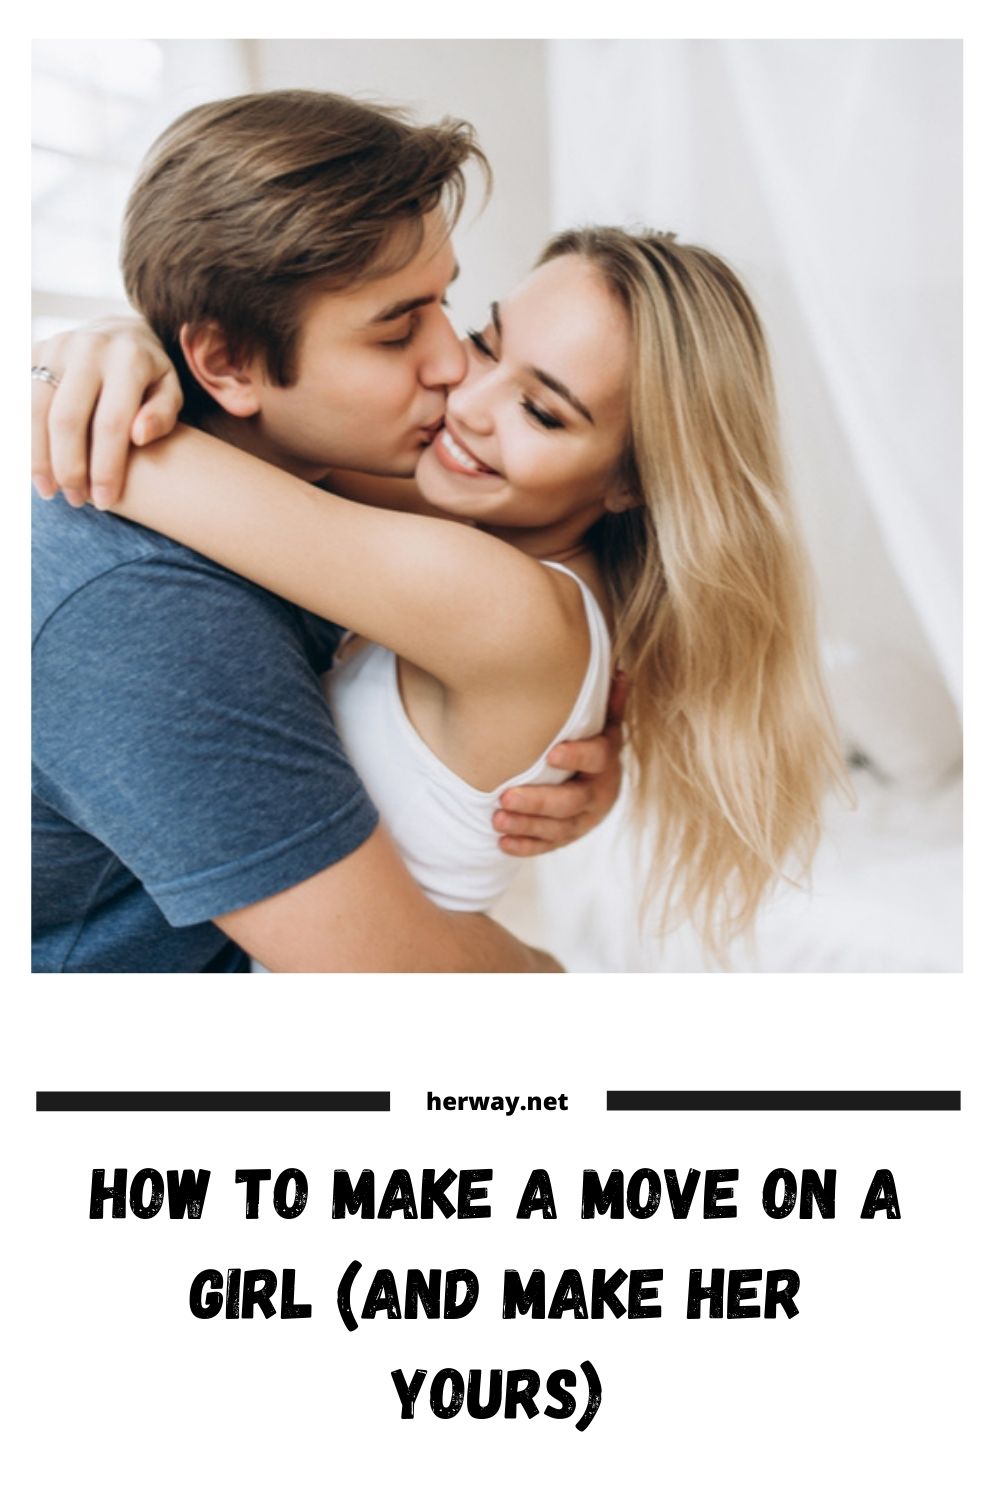 How To Make A Move On A Girl (And Make Her Yours)